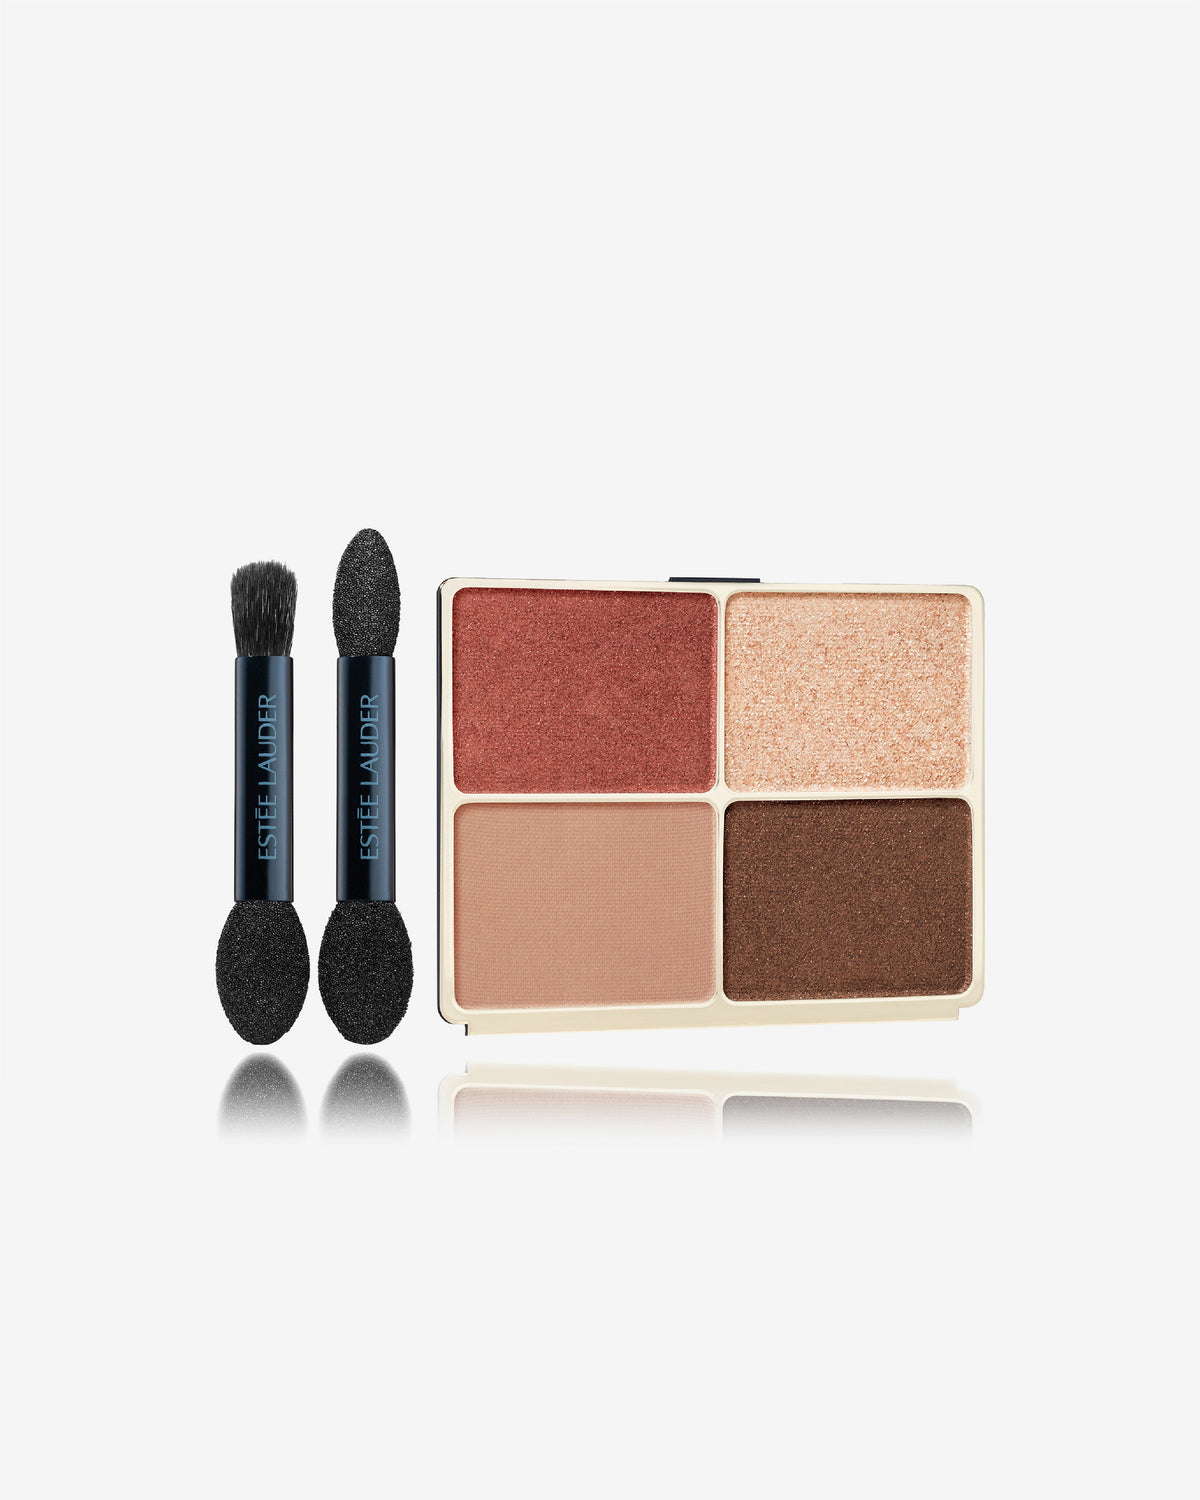 Pure Color Envy Luxe Eyeshadow Quad Refill